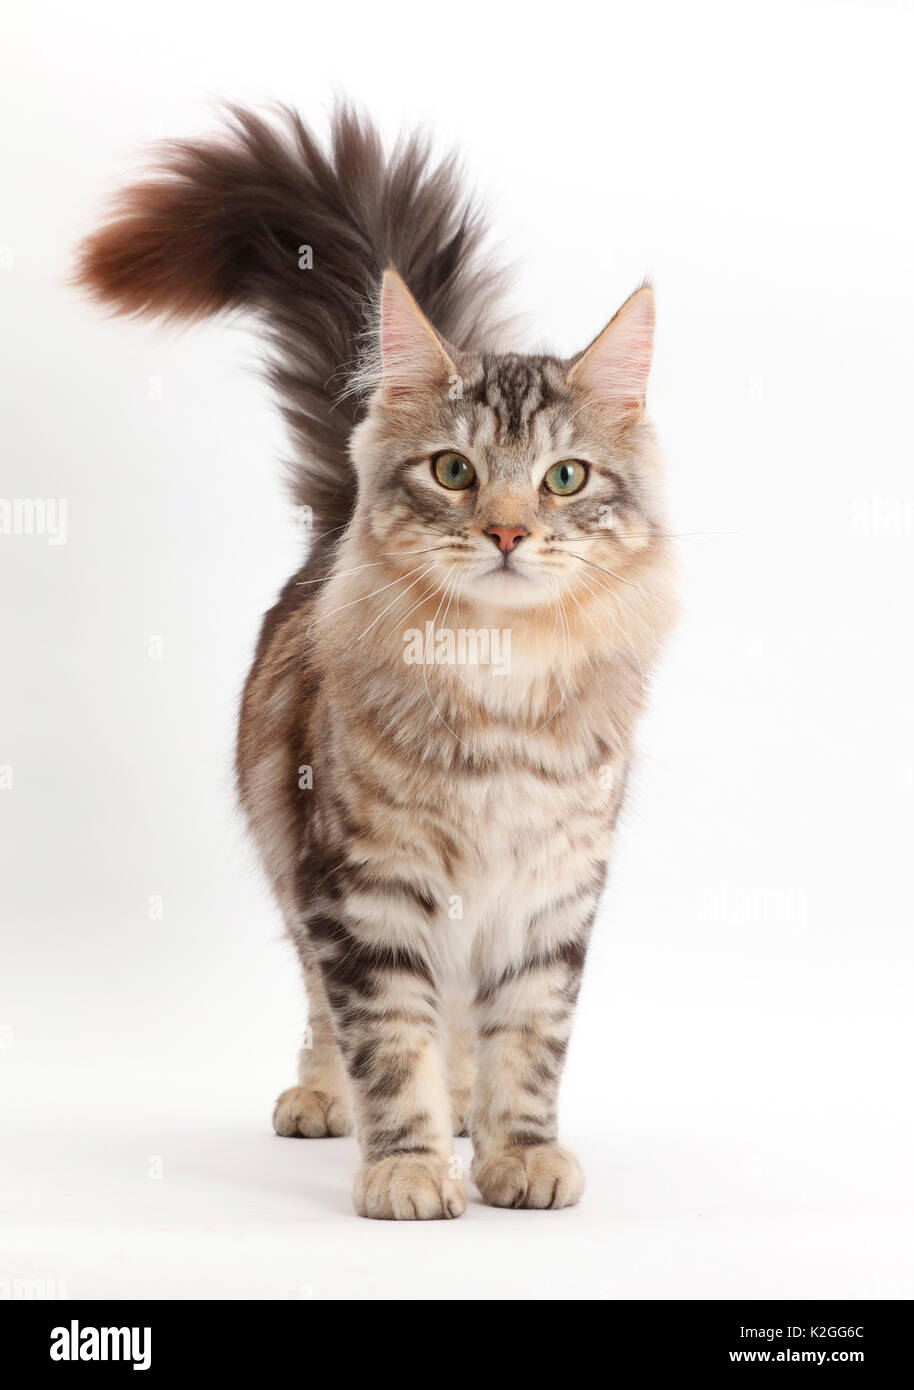 Silver tabby cat, Loki, age 7 months, walking with tail up. Stock Photo